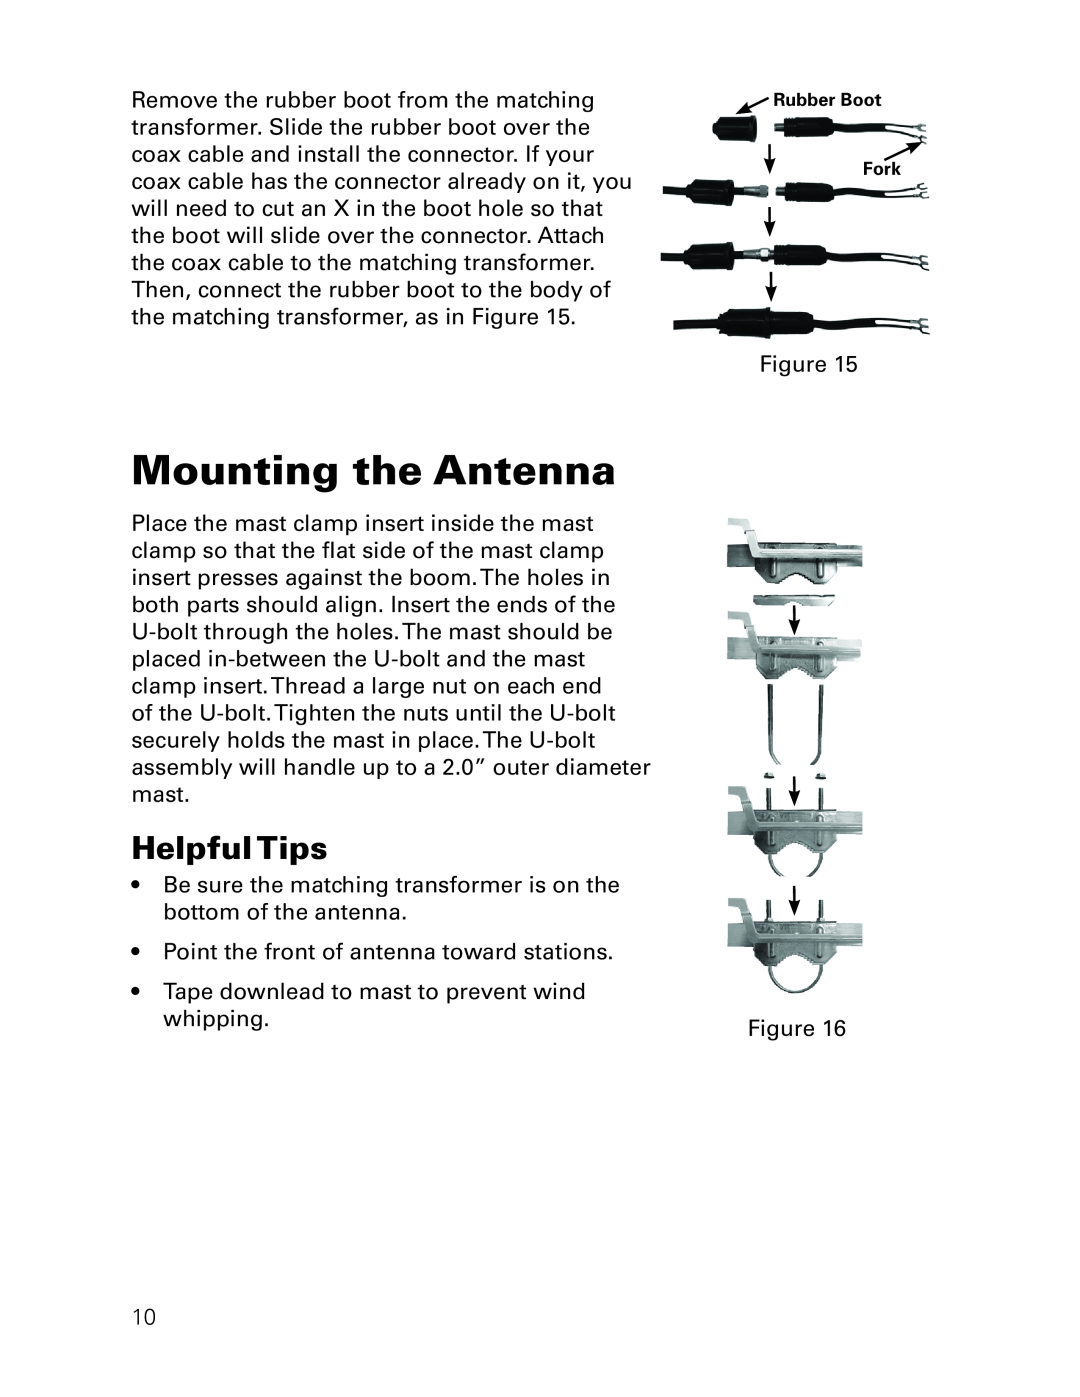 RCA ANT3037X installation manual Mounting the Antenna, Helpful Tips 